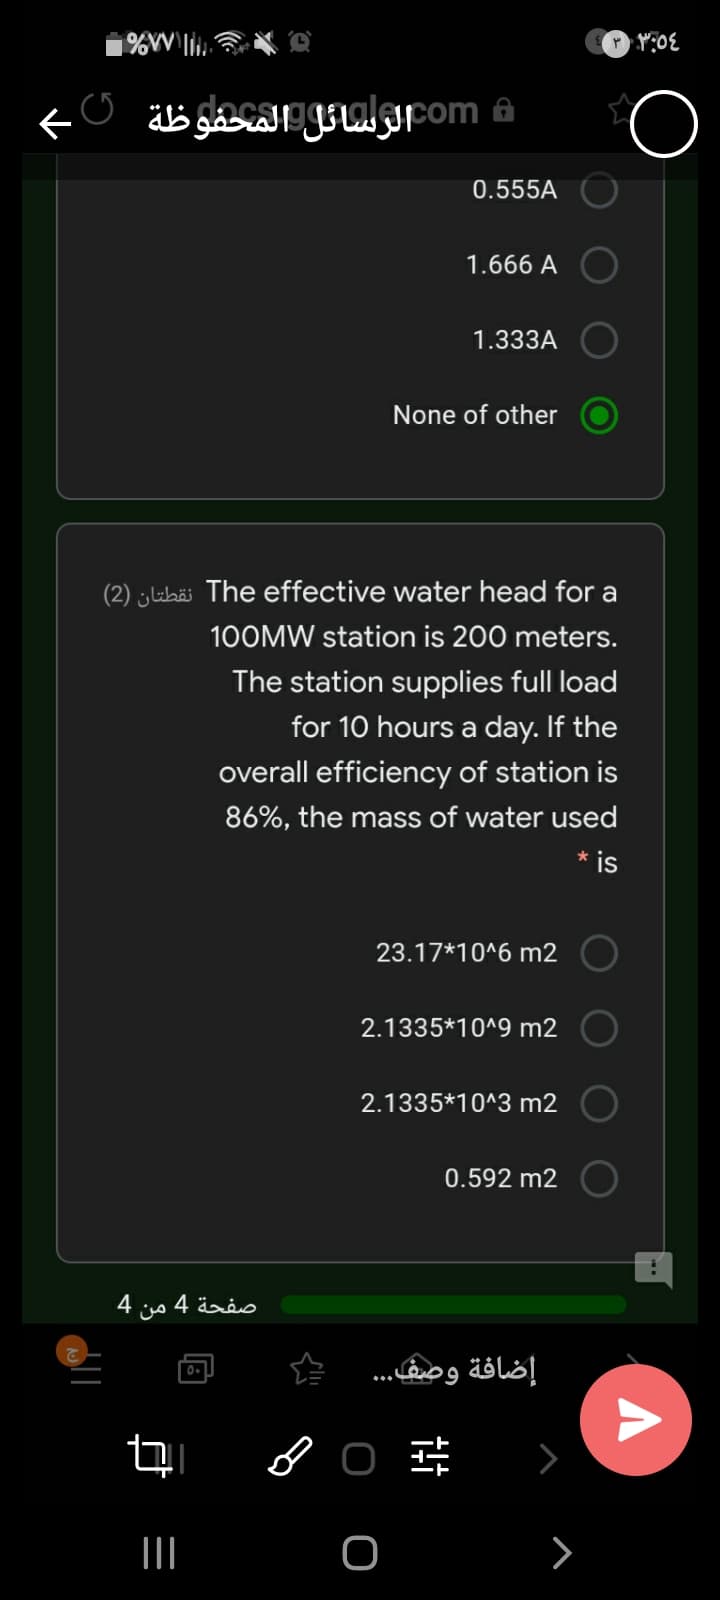 0.555A
1.666 A
1.333A
None of other
(2) ¿lubäi The effective water head for a
100MW station is 200 meters.
The station supplies full load
for 10 hours a day. If the
overall efficiency of station is
86%, the mass of water used
* is
23.17*10^6 m2
2.1335*10^9 m2
2.1335*10^3 m2
0.592 m2
4
من
صفحة 4
إضافة وصف.
>
